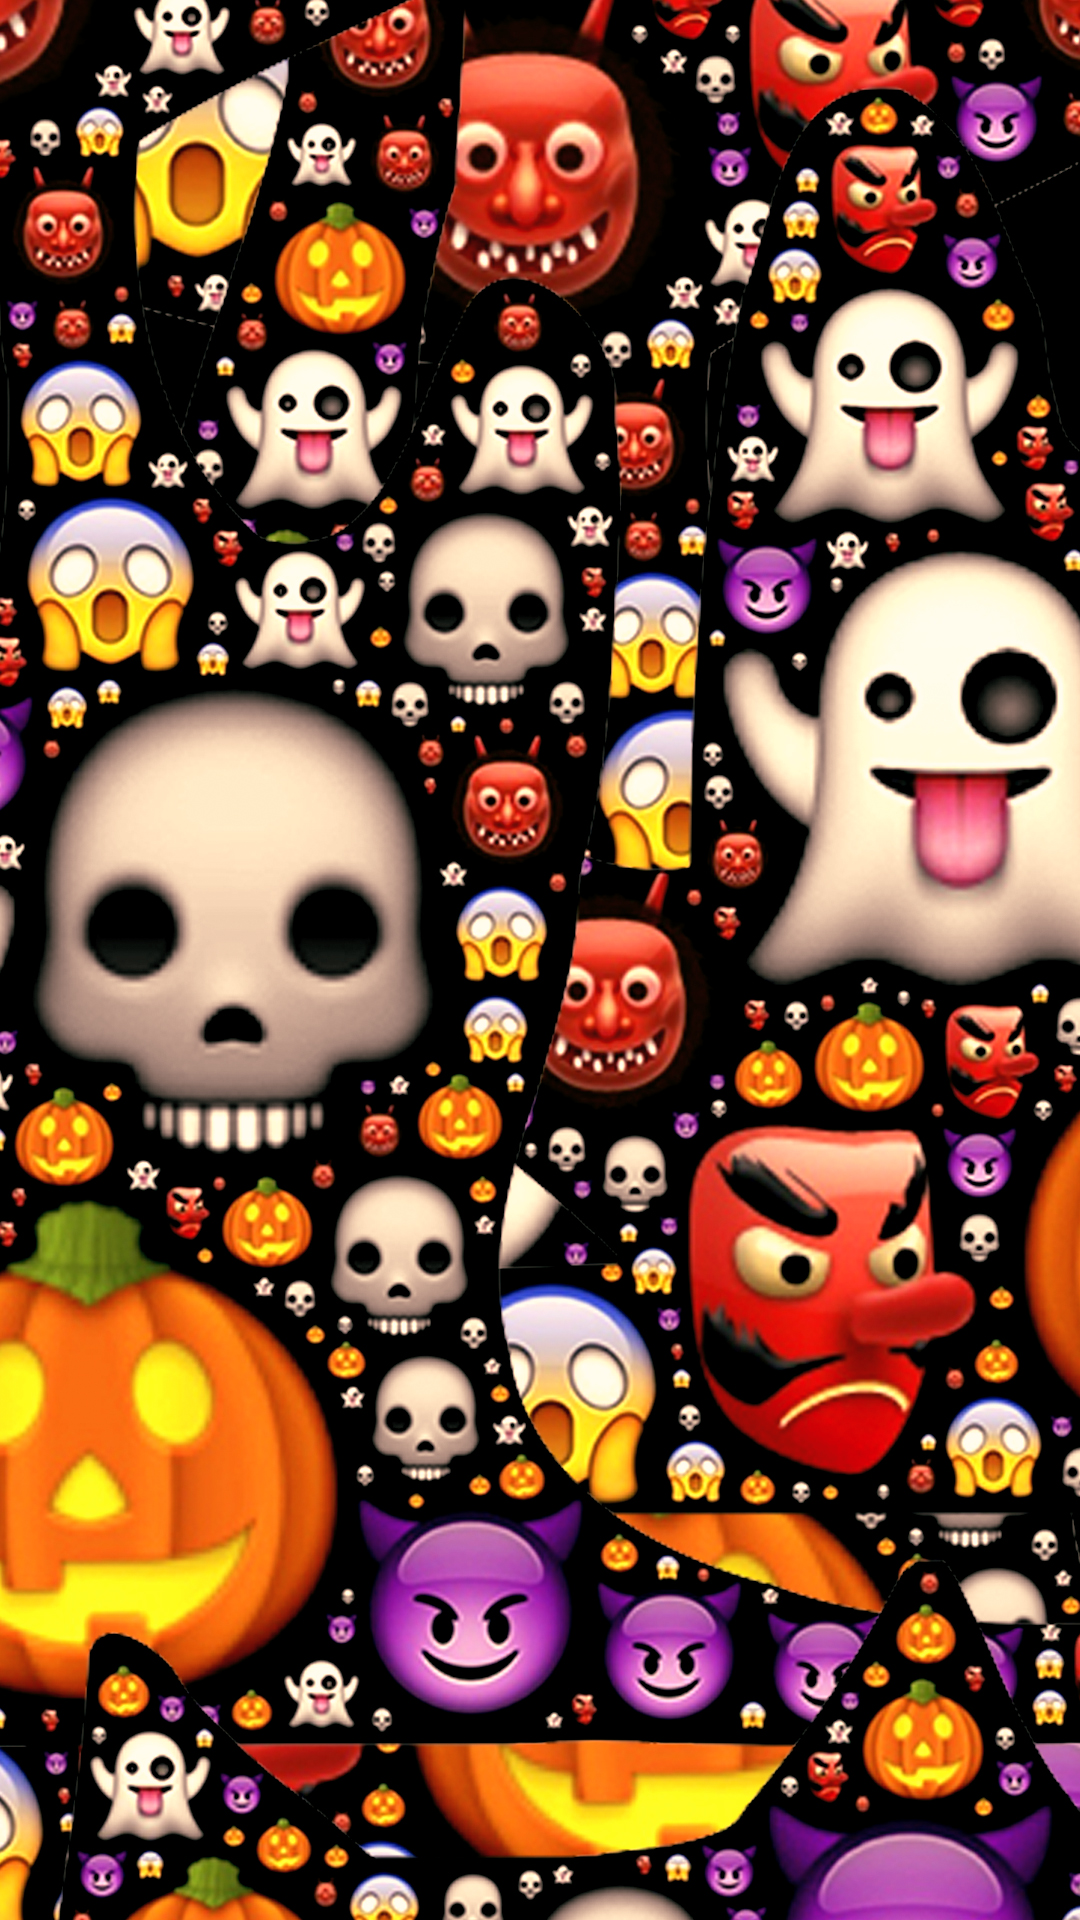 Emoji Mess HD Wallpaper For Your Mobile Phone